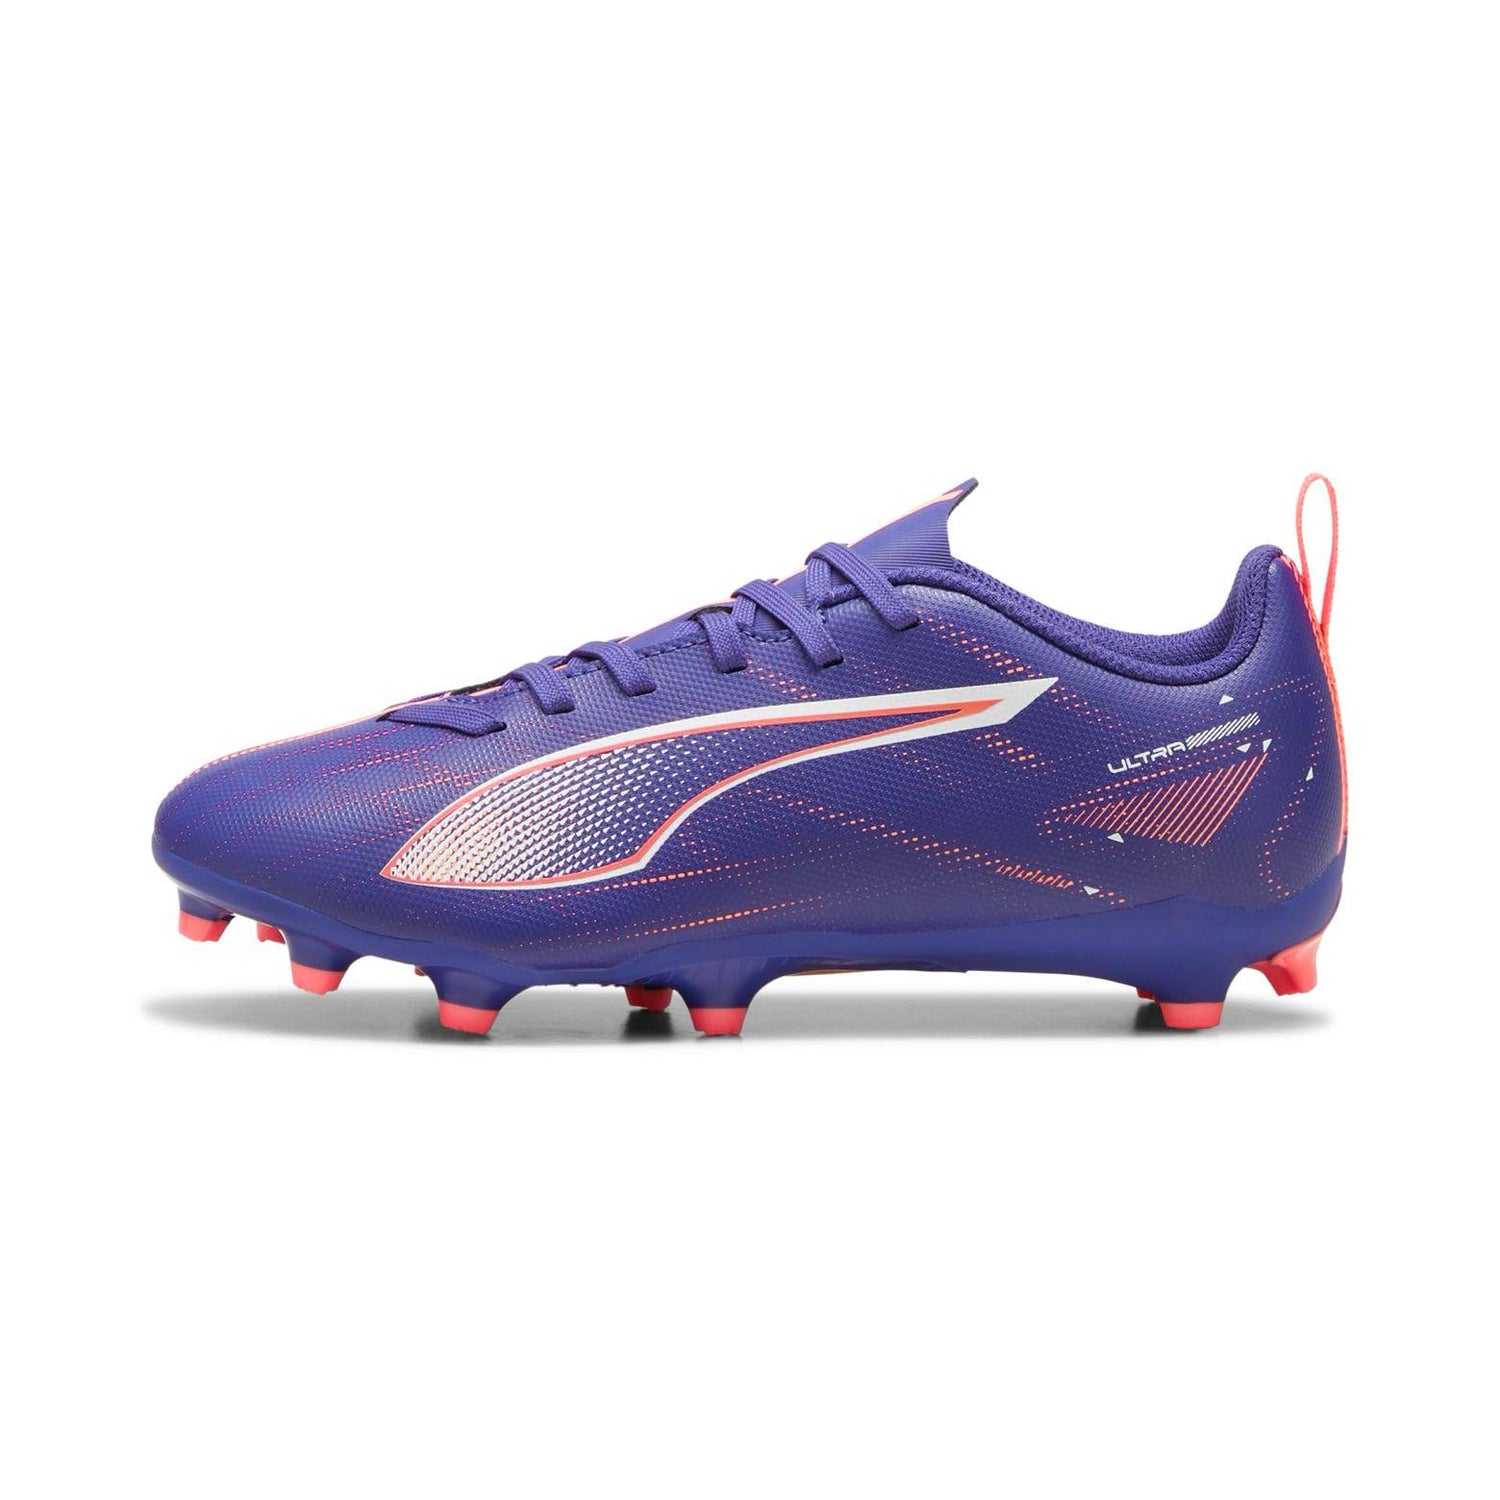 PUMA ULTRA 5 Play FG/AG Jr. Soccer Cleats for firm ground and artificial grass